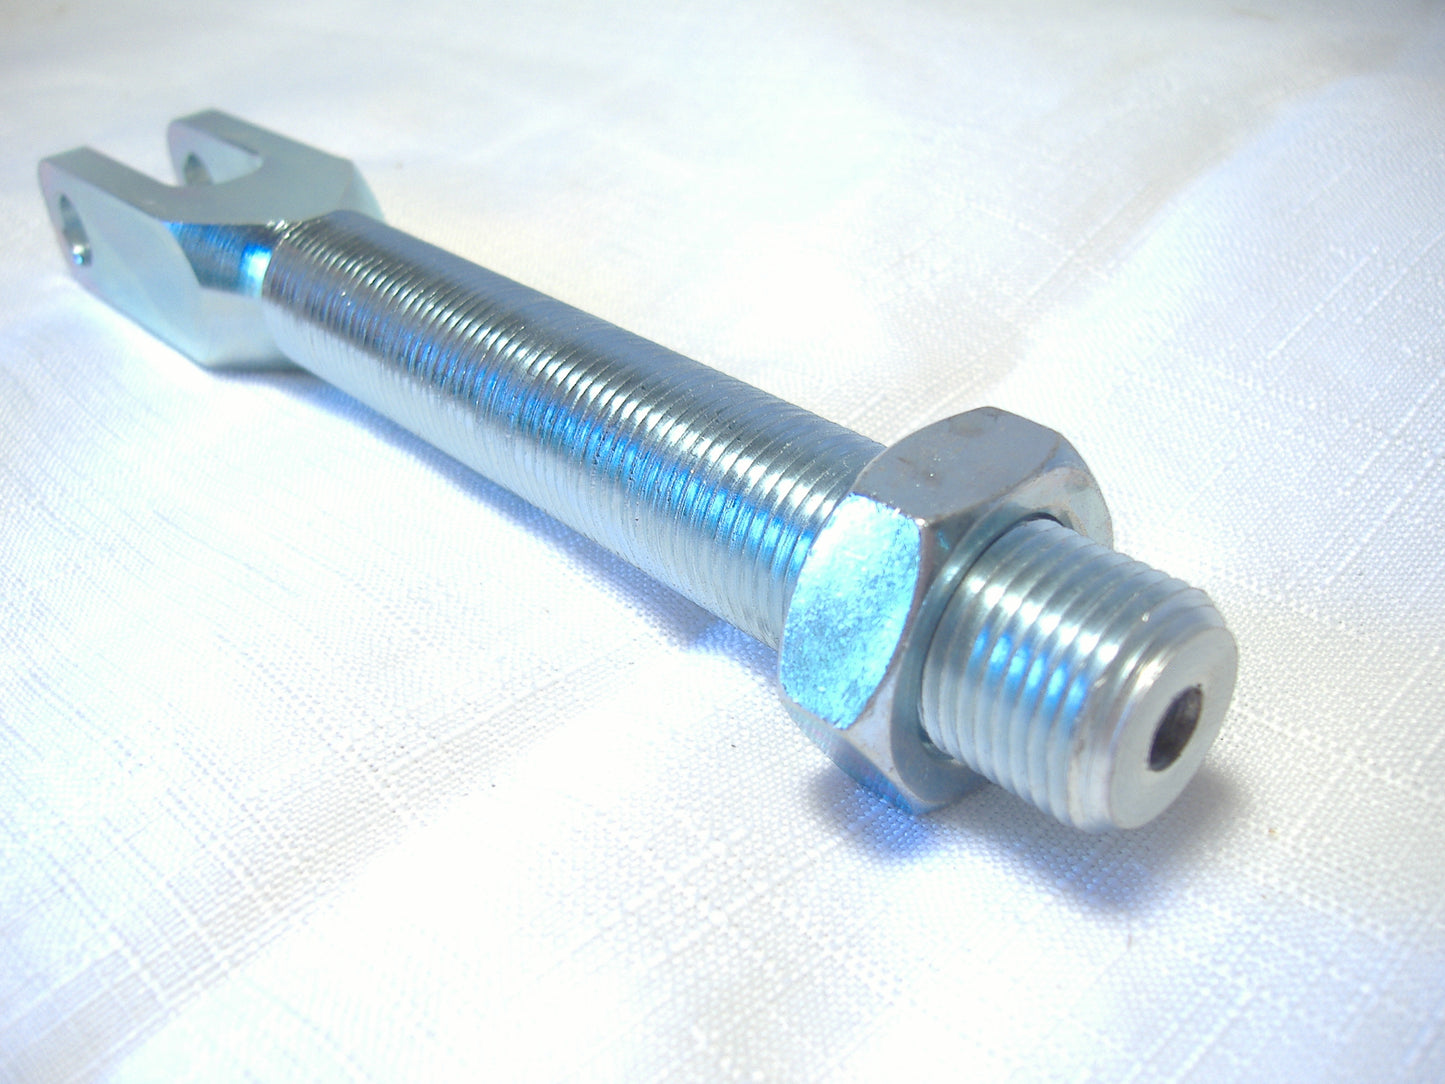 Clevis Bolt for California Sidecar Strut: Reproduction